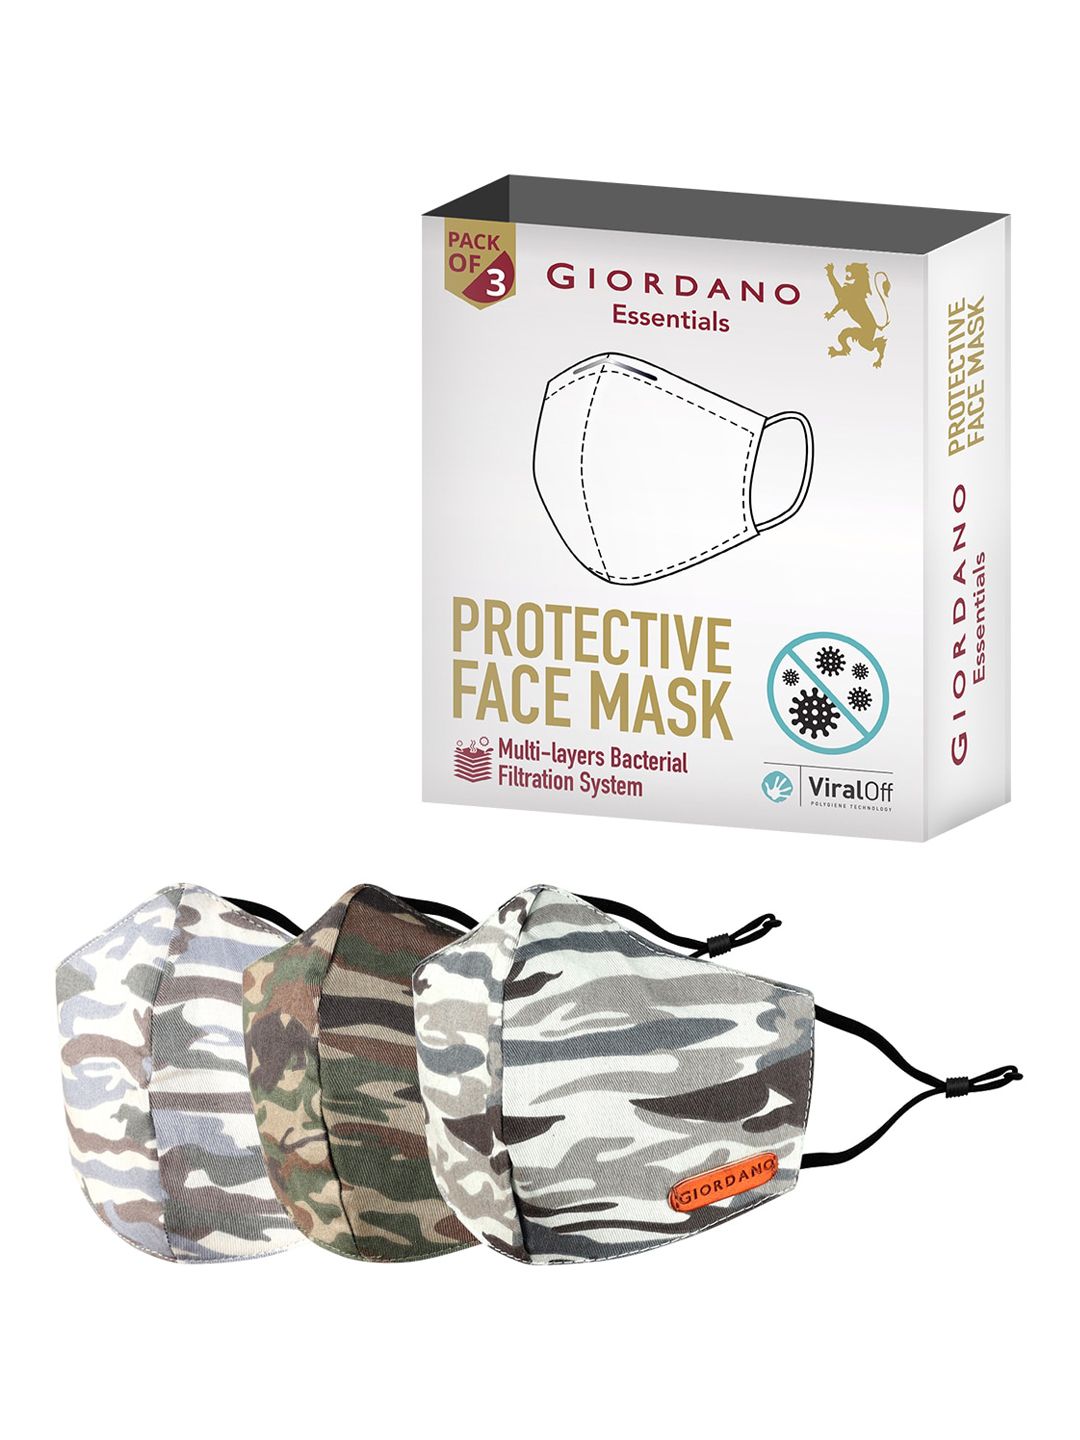 GIORDANO Unisex Pack Of 3 Camouflage Print 6-Ply Multi-Layer Bacterial Filtration Cotton Cloth Mask Price in India